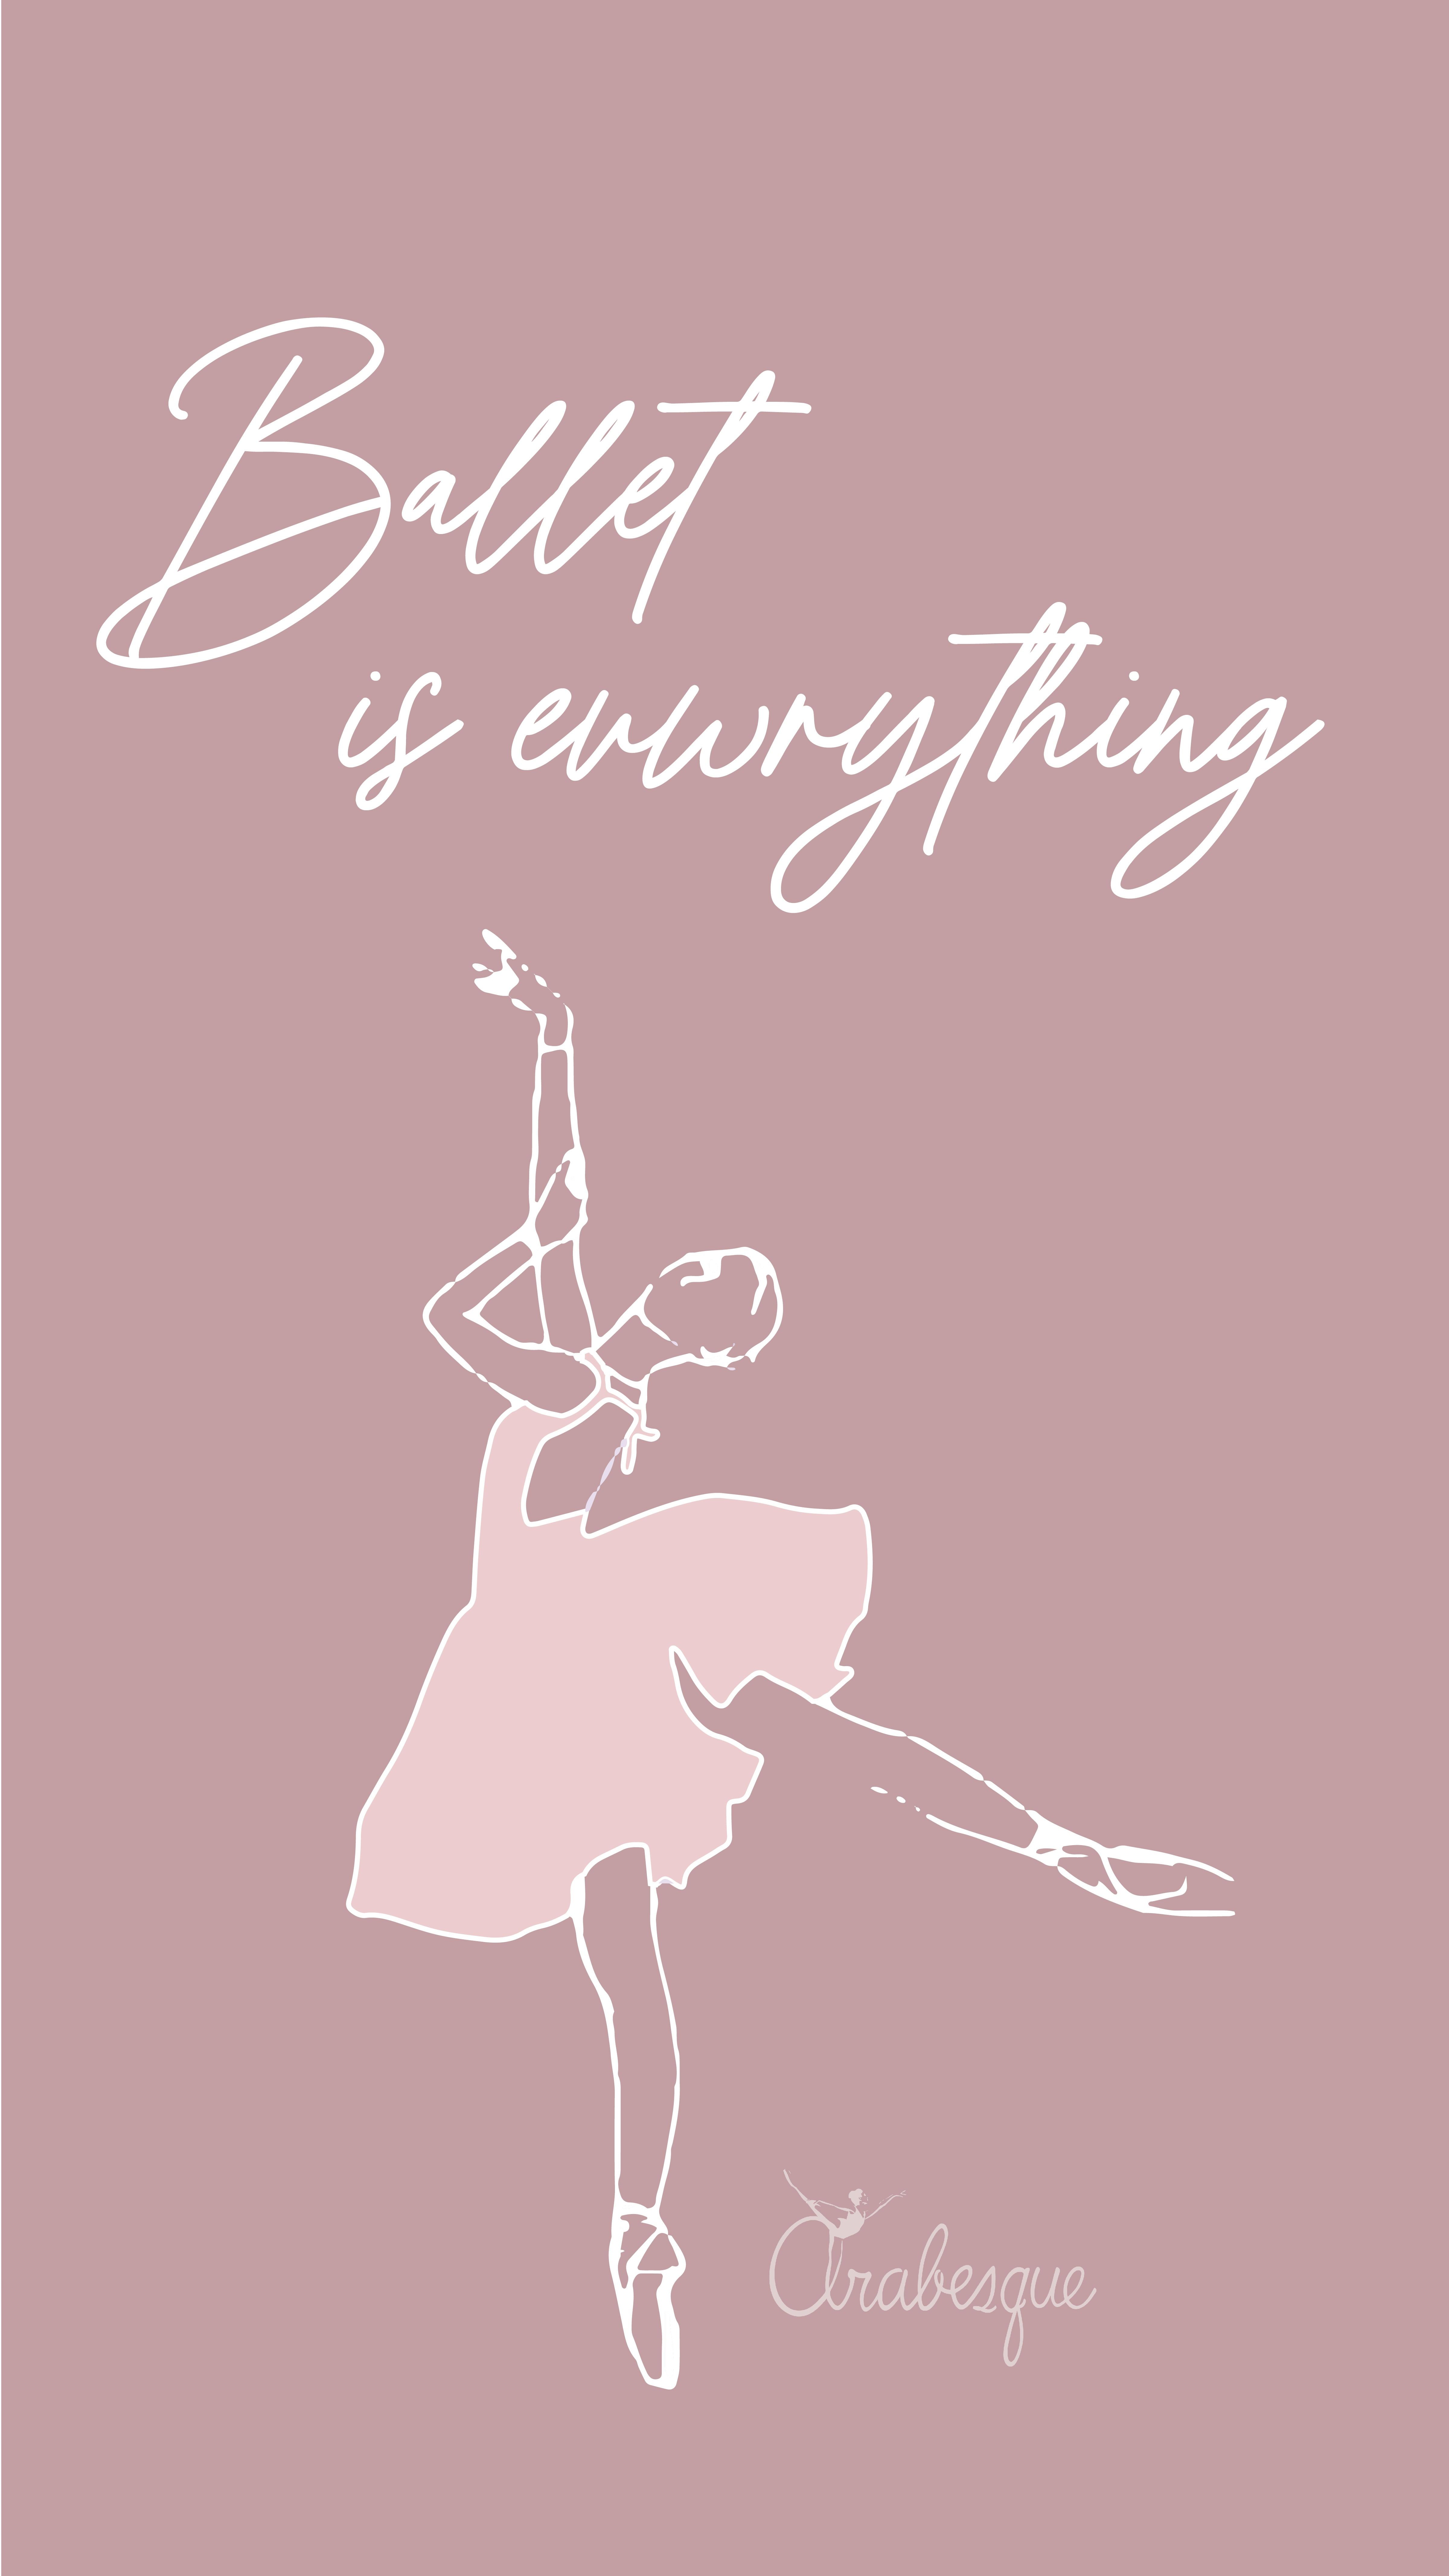 A beautiful poster with a ballerina in a pose and the words 